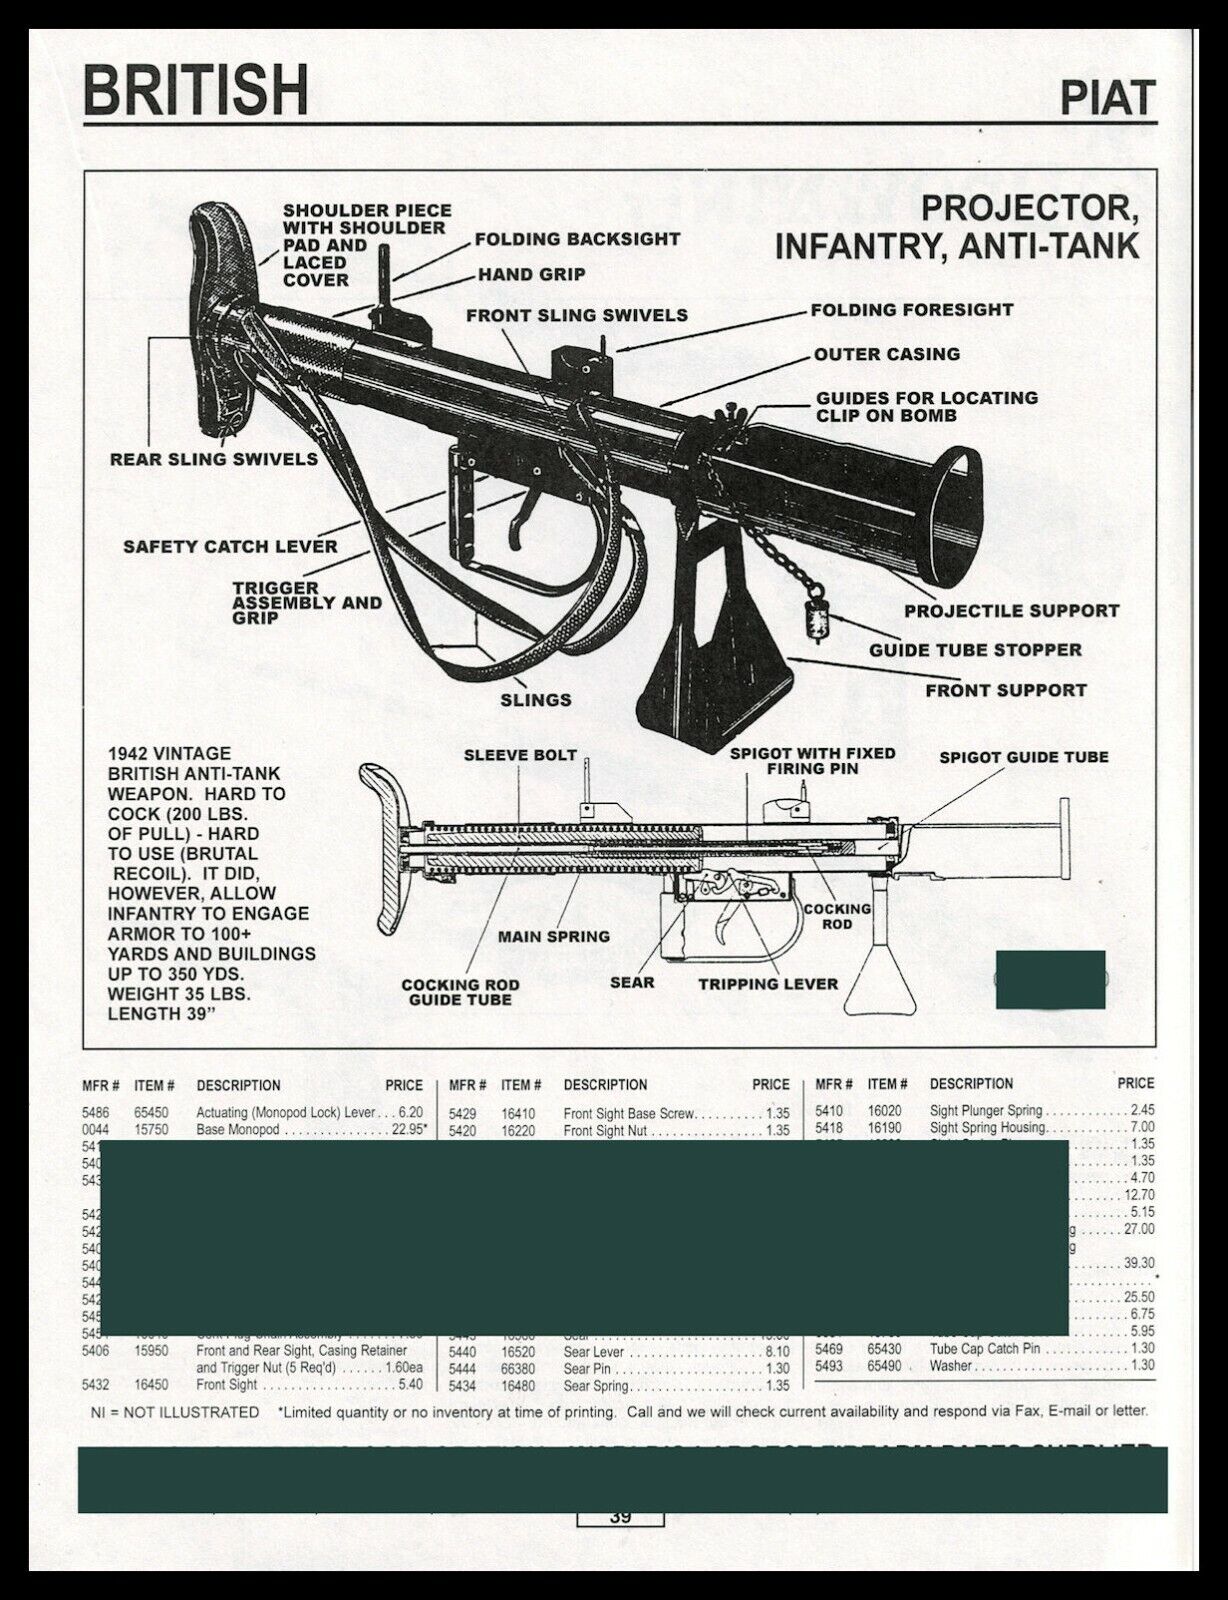 1999 BRITISH PIAT Projector Infantry Ani-Tank Weapon Parts List AD